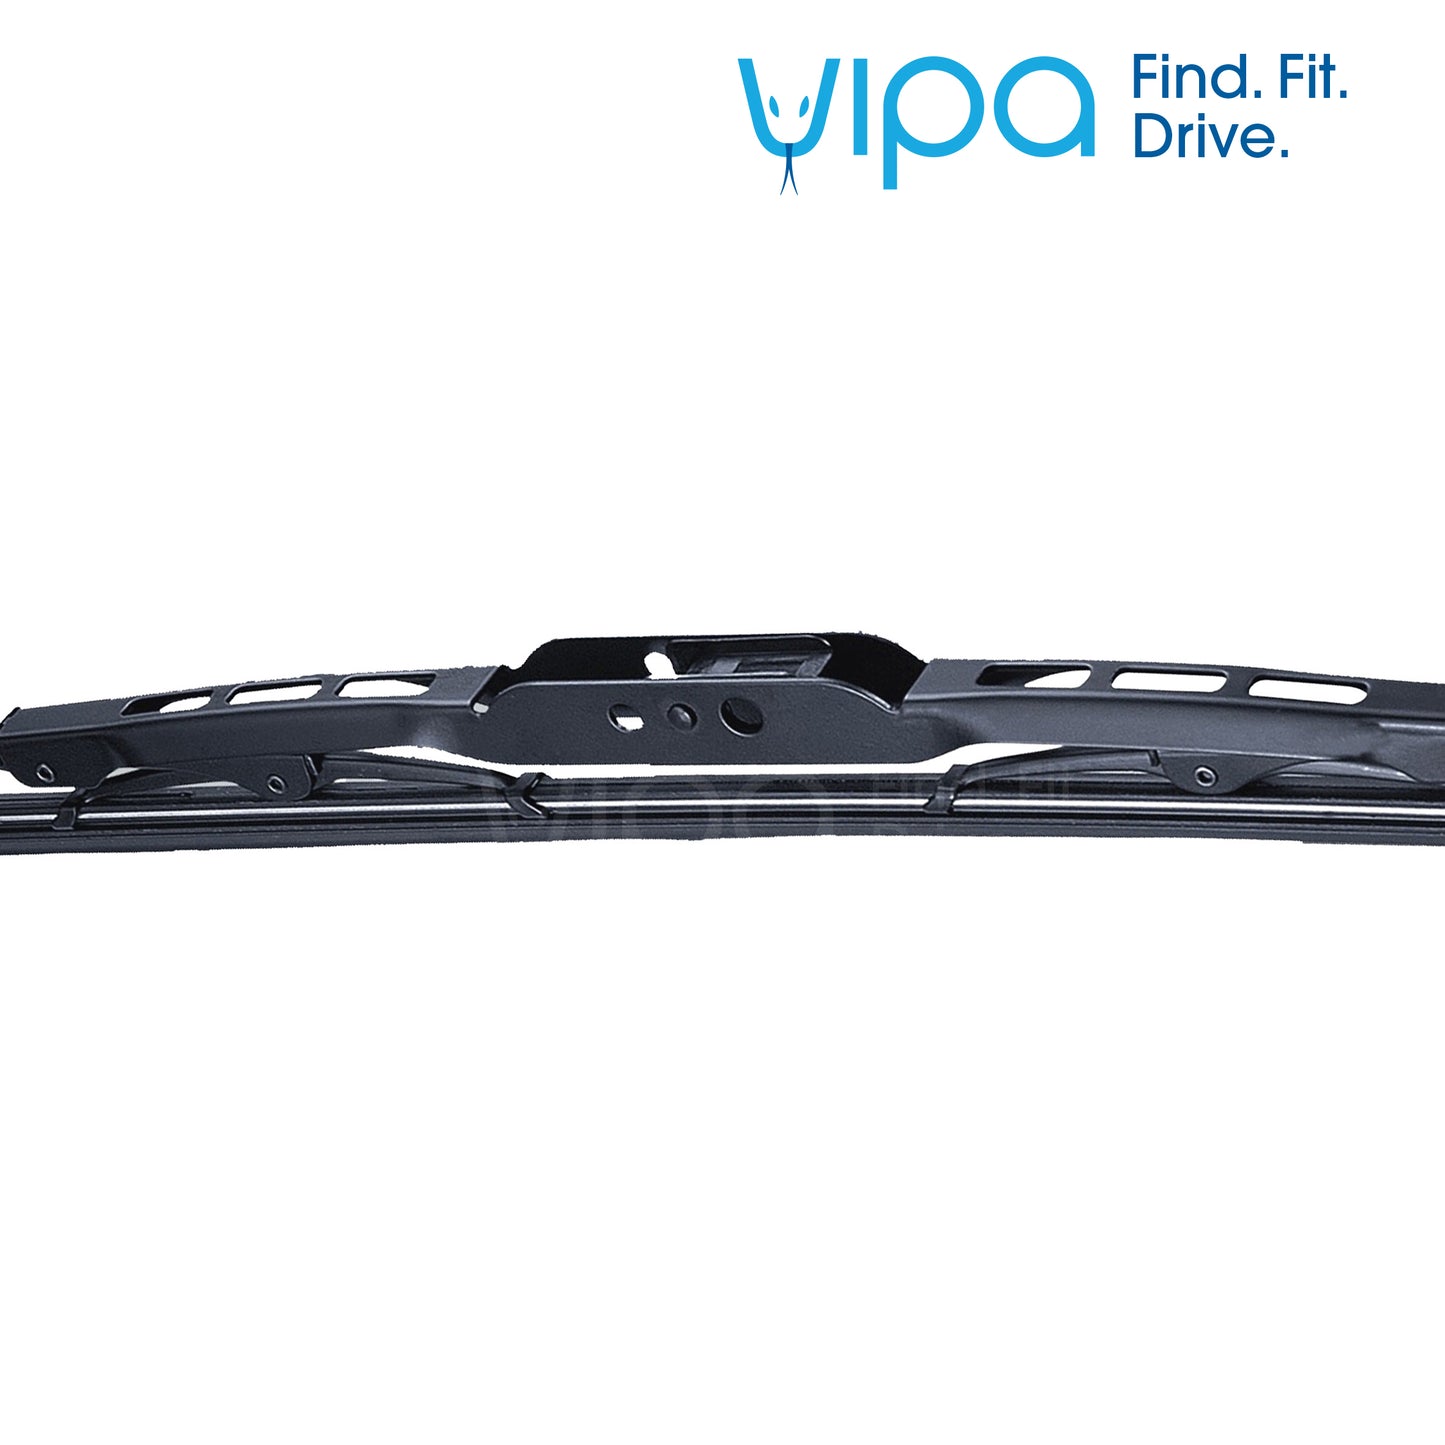 VW POLO Estate May 1997 to Sep 2001 Wiper Blade Kit